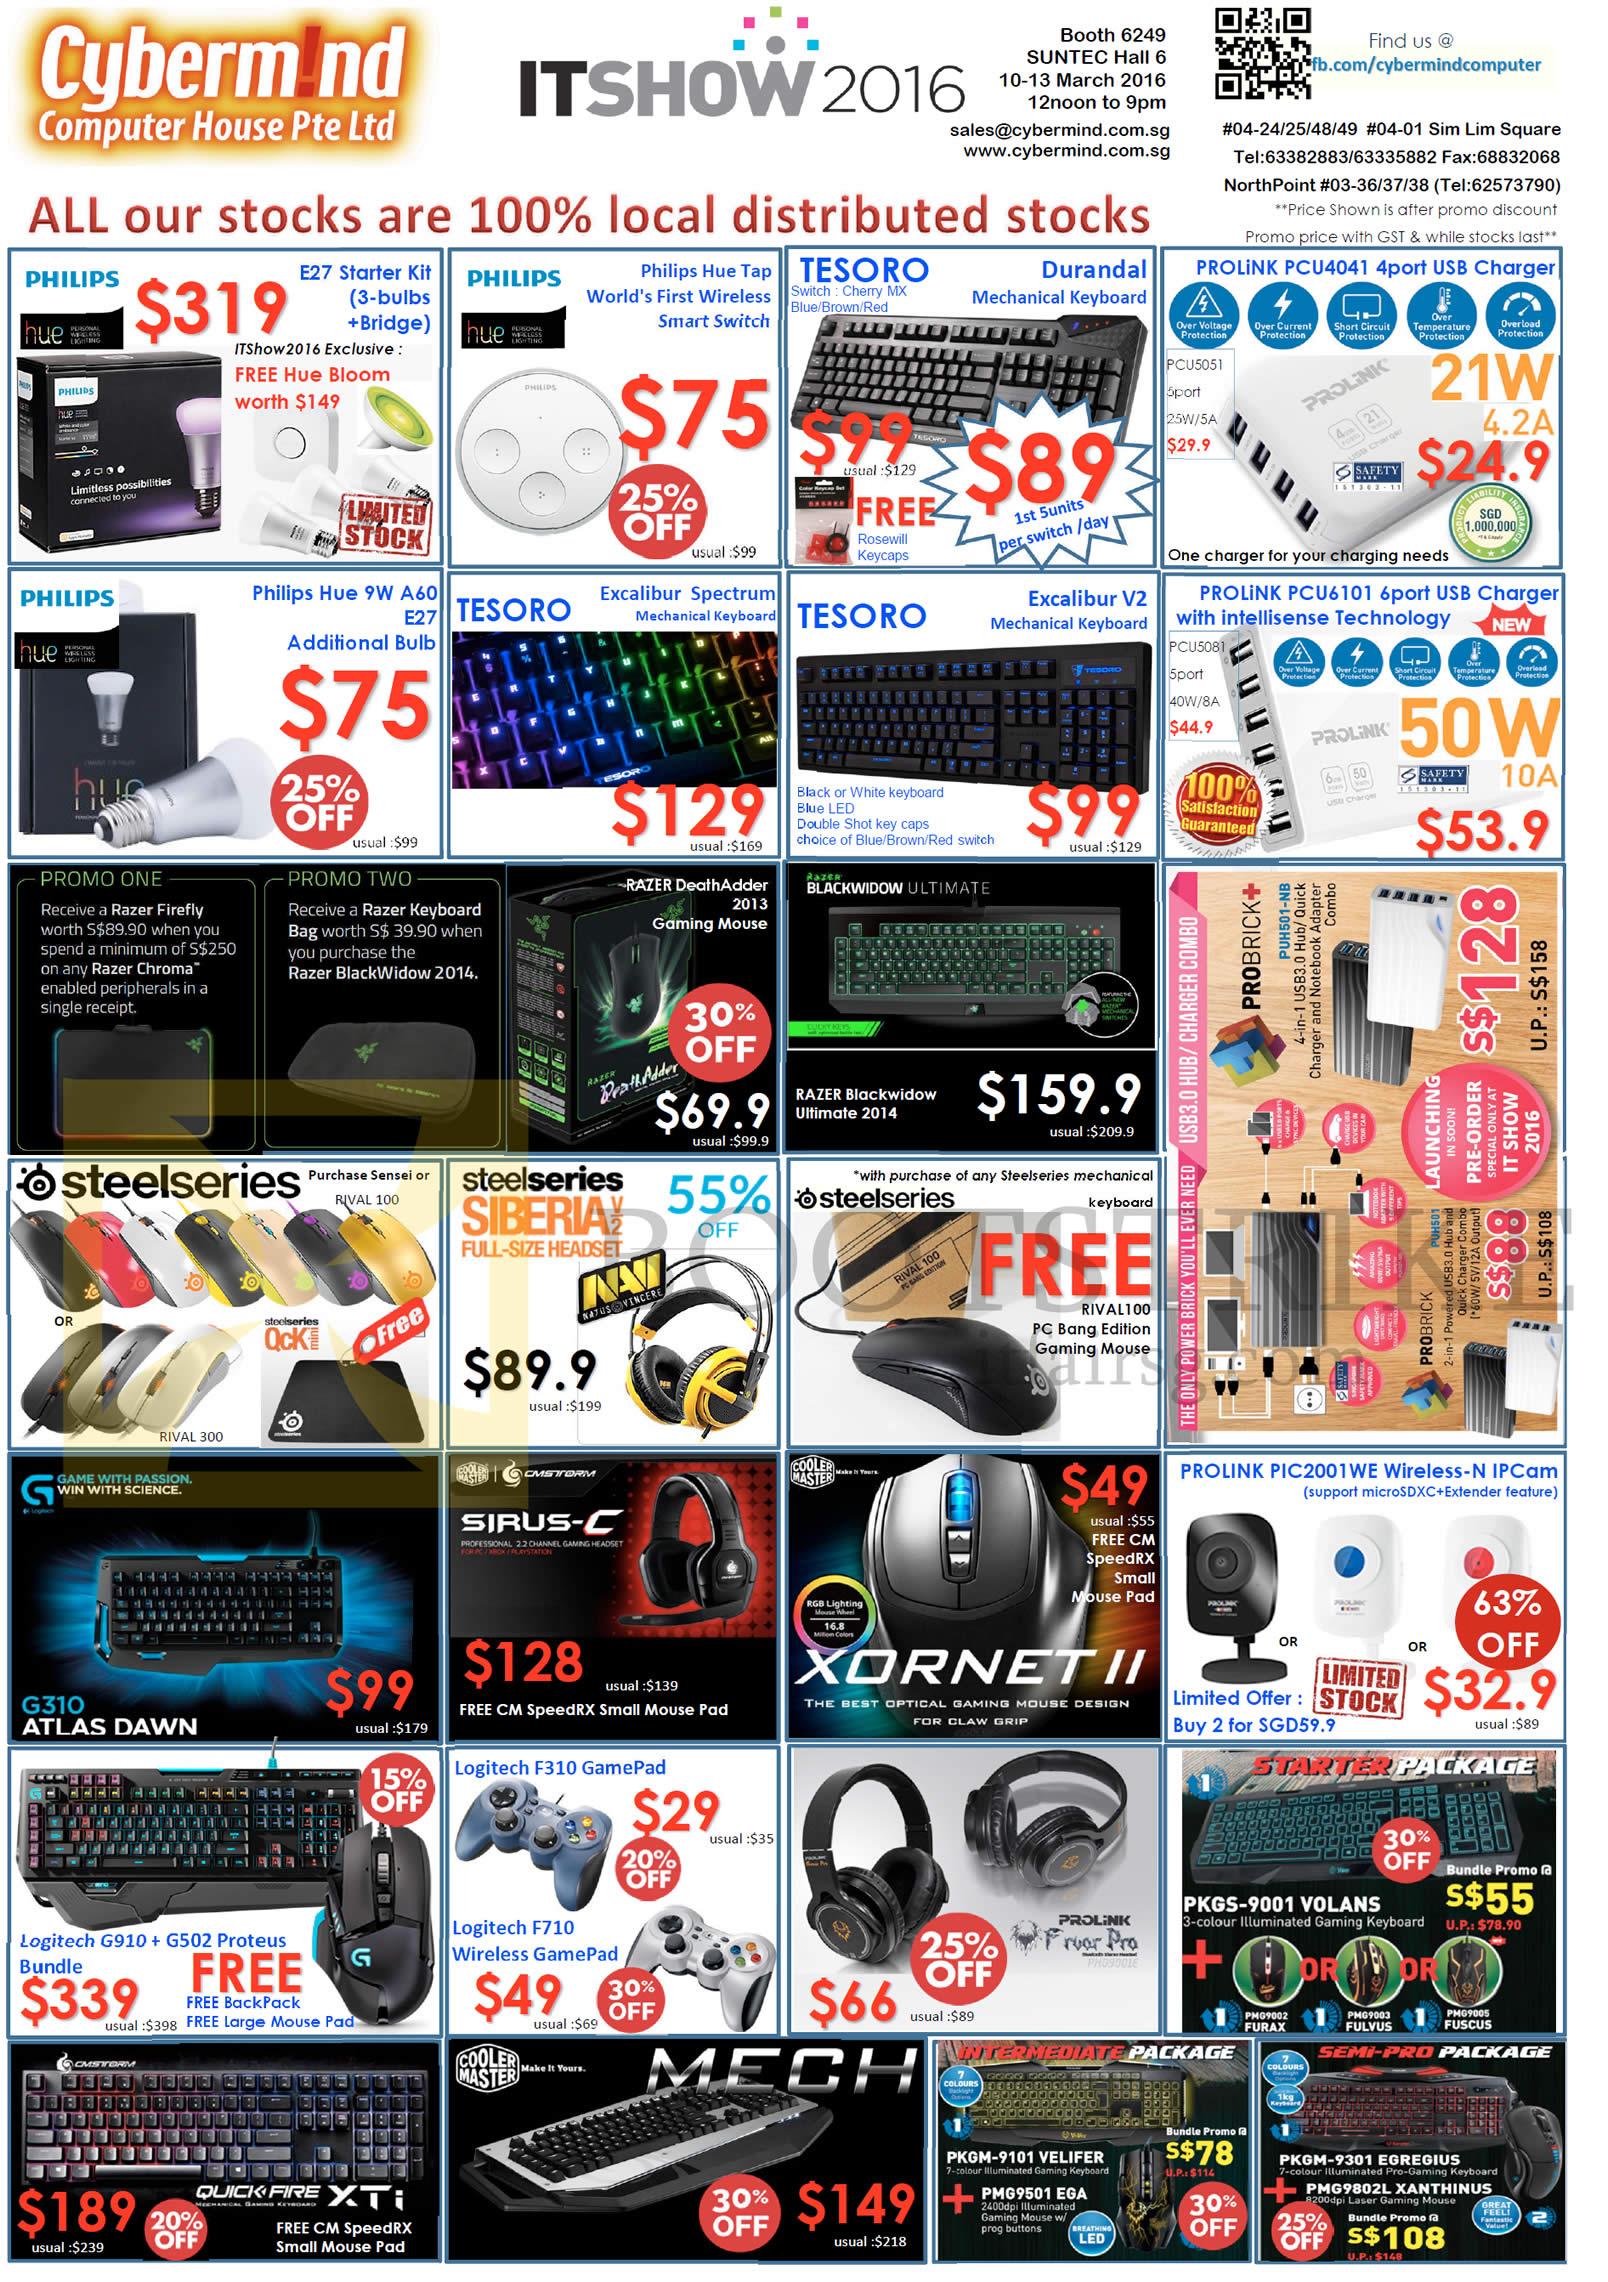 IT SHOW 2016 price list image brochure of Cybermind Bulbs, Smart Switch, Keyboard, USB Charger, Keyboard, Mouse, Headphones